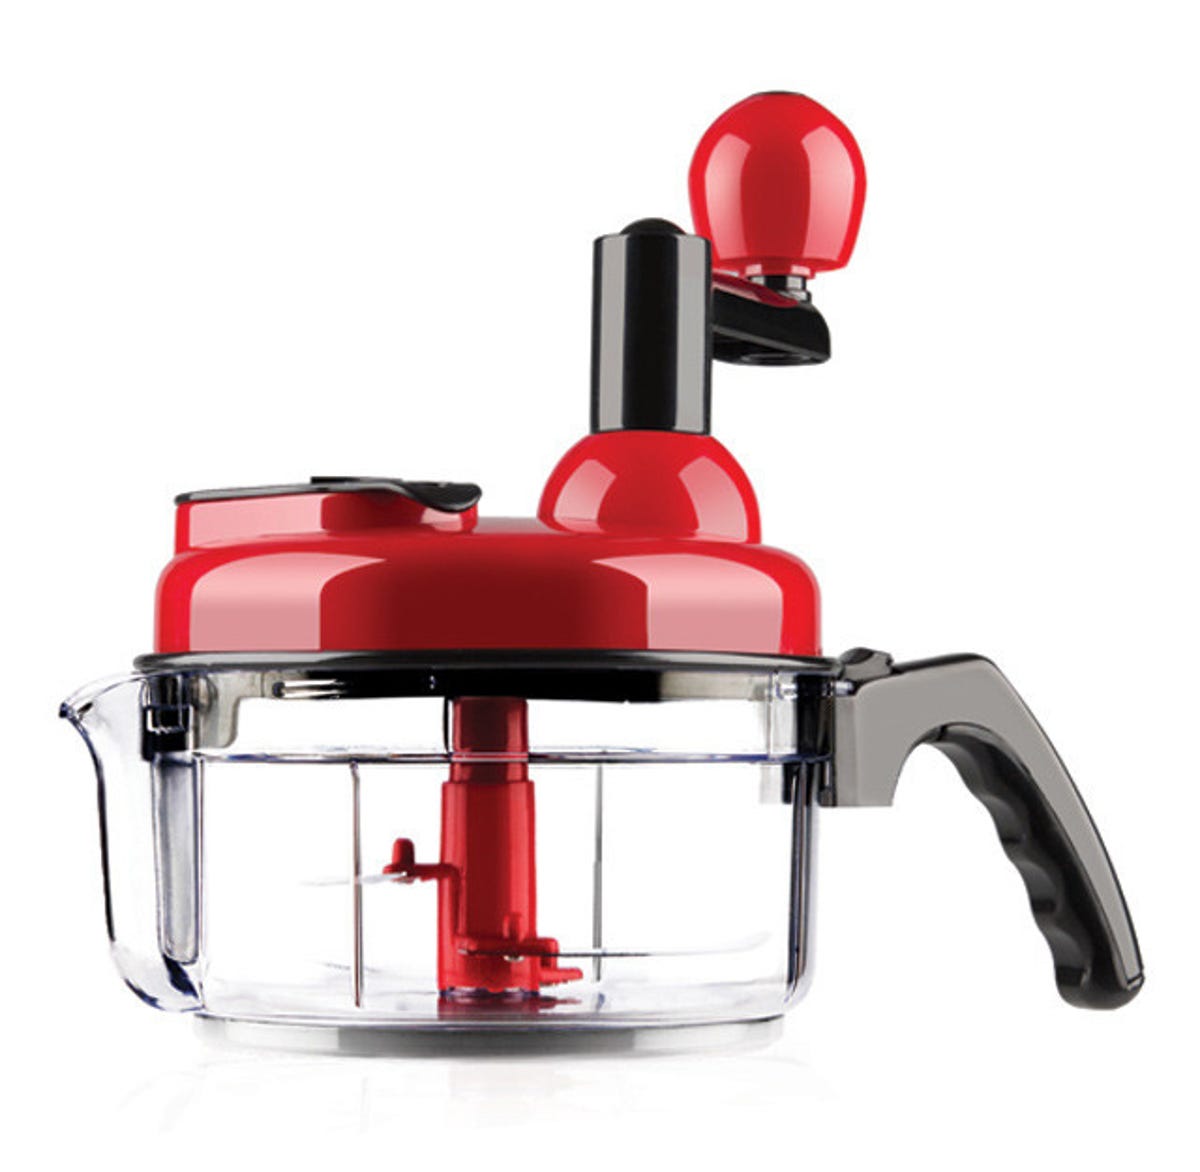 Imagine the possibilities, and then make them happen with the Zweissen Quick Chop Food Processor/Salsa Maker.